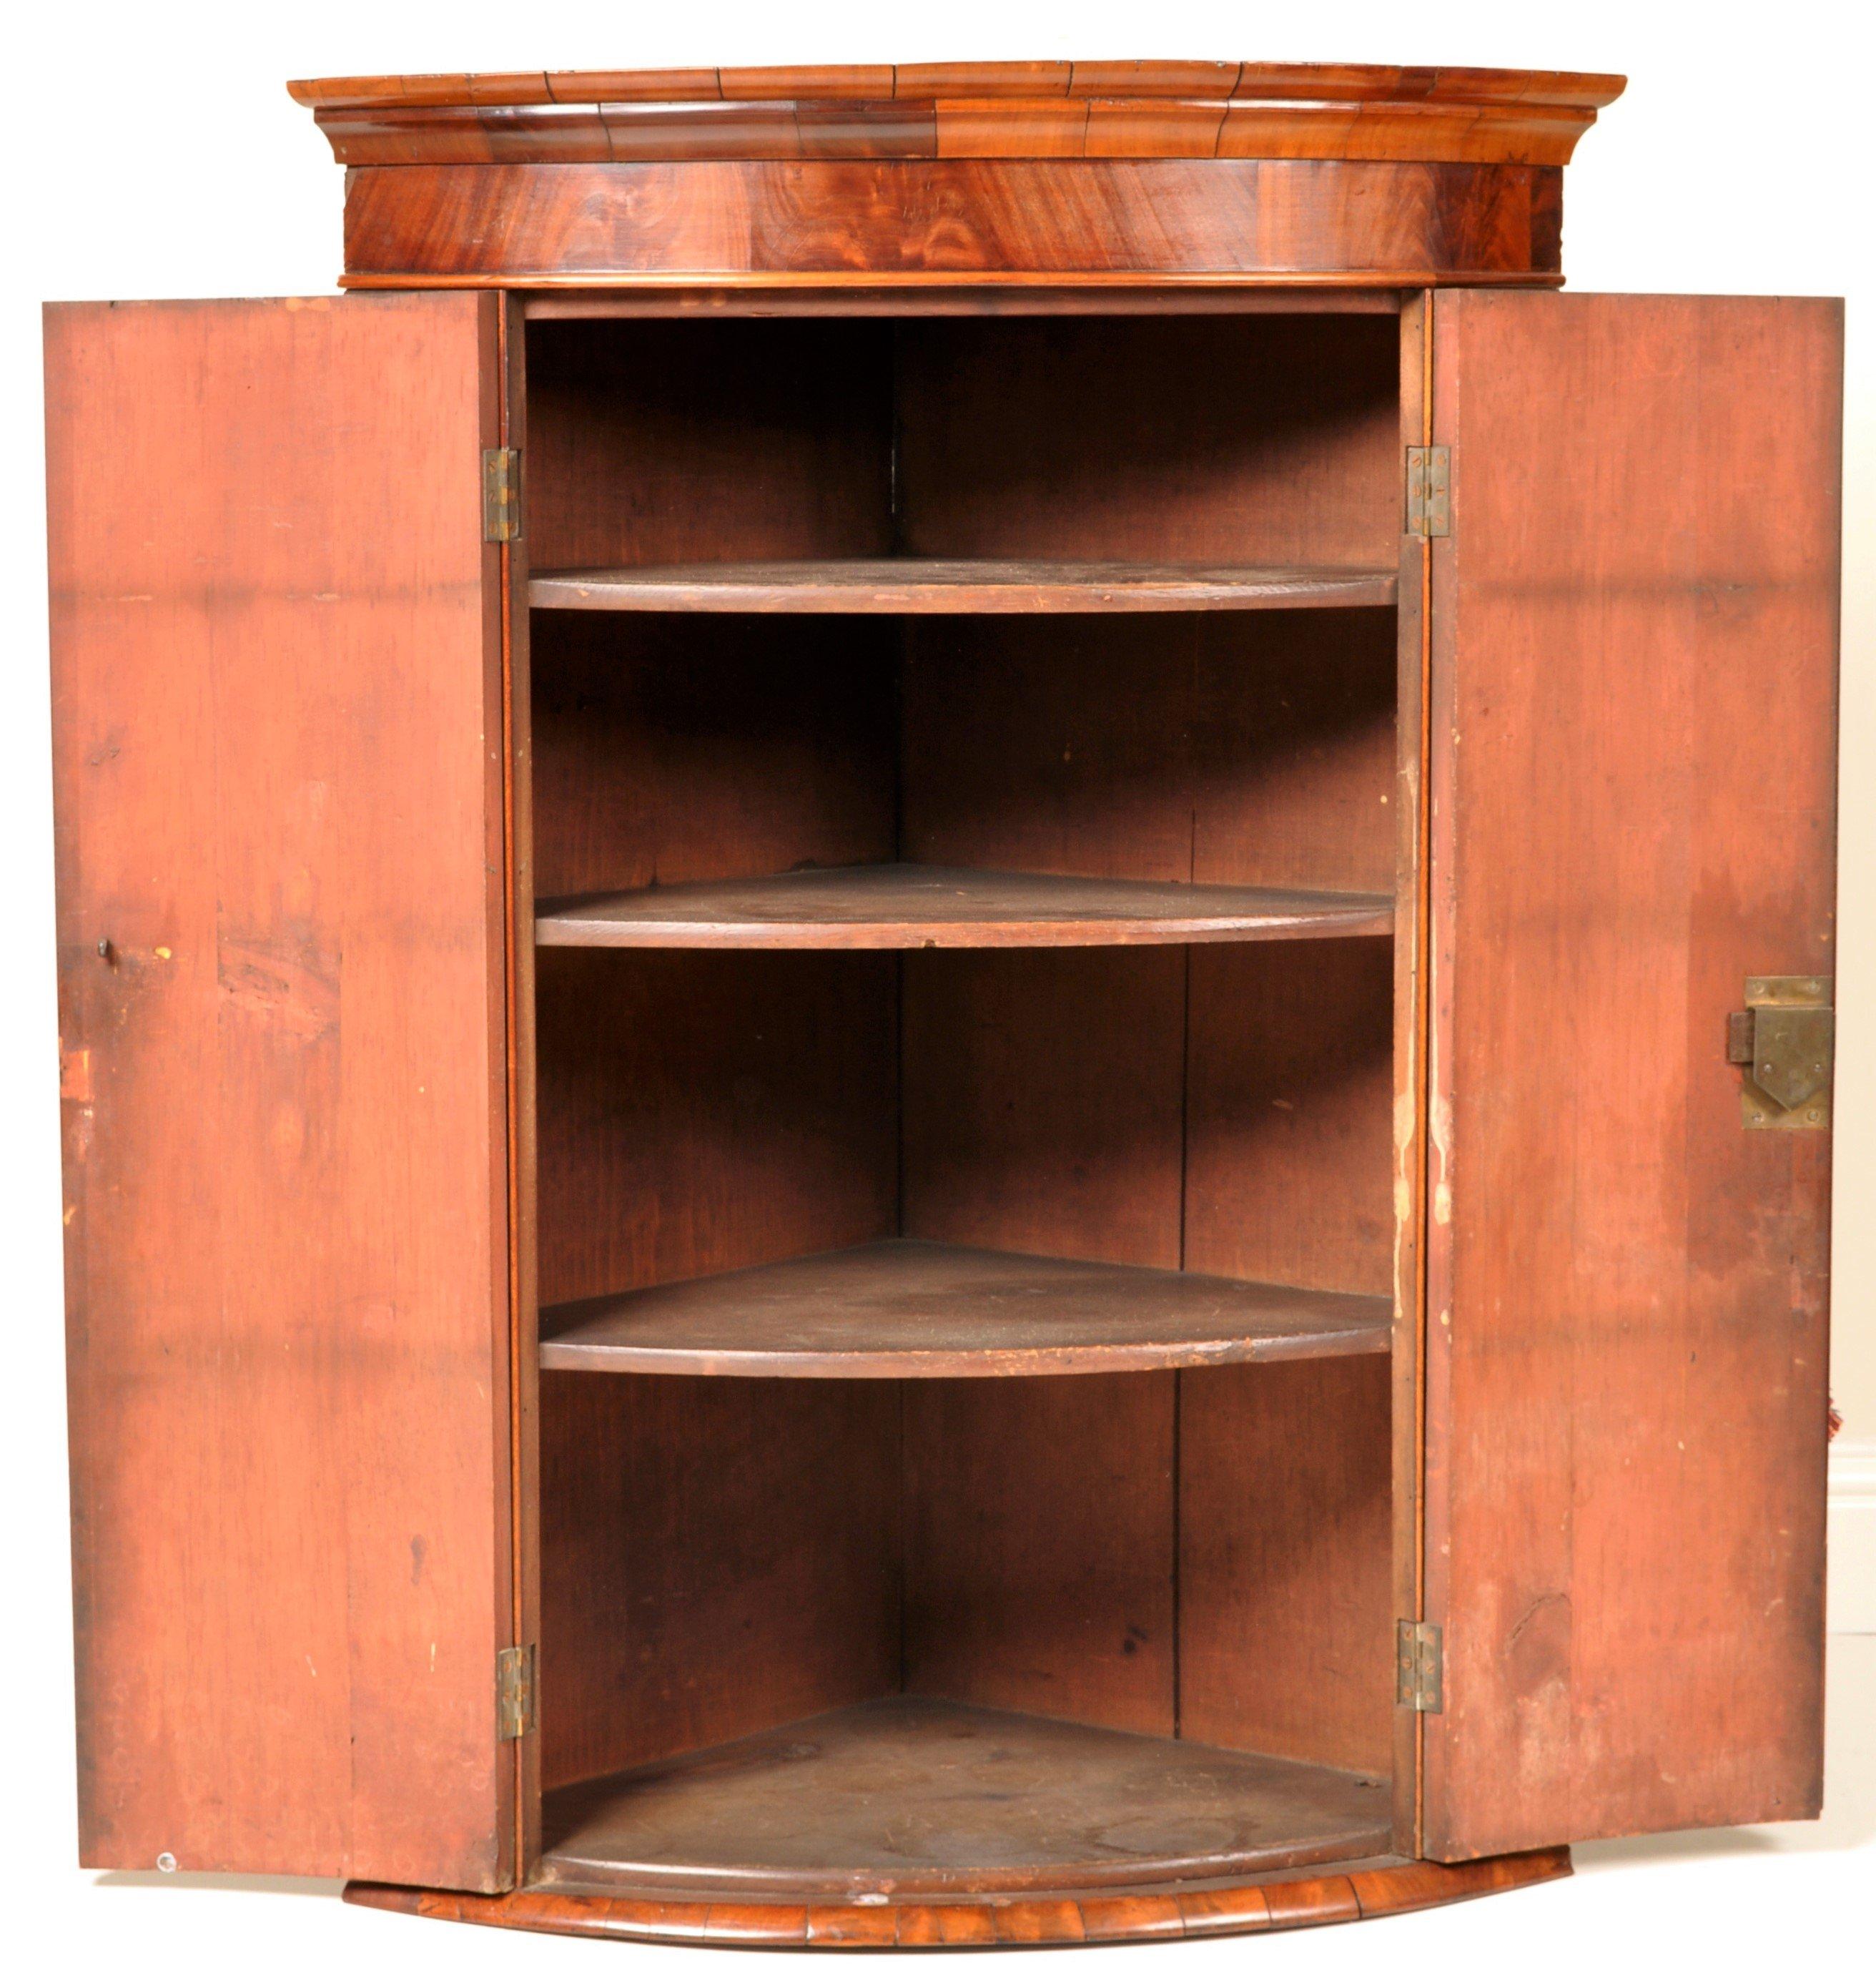 Antique English Georgian flame mahogany bow-fronted corner cabinet, circa 1780. The top with a simple molding below a band of cock beading, having a pair of bowed doors enclosing three shelves, the cabinet retaining the original lock and made from